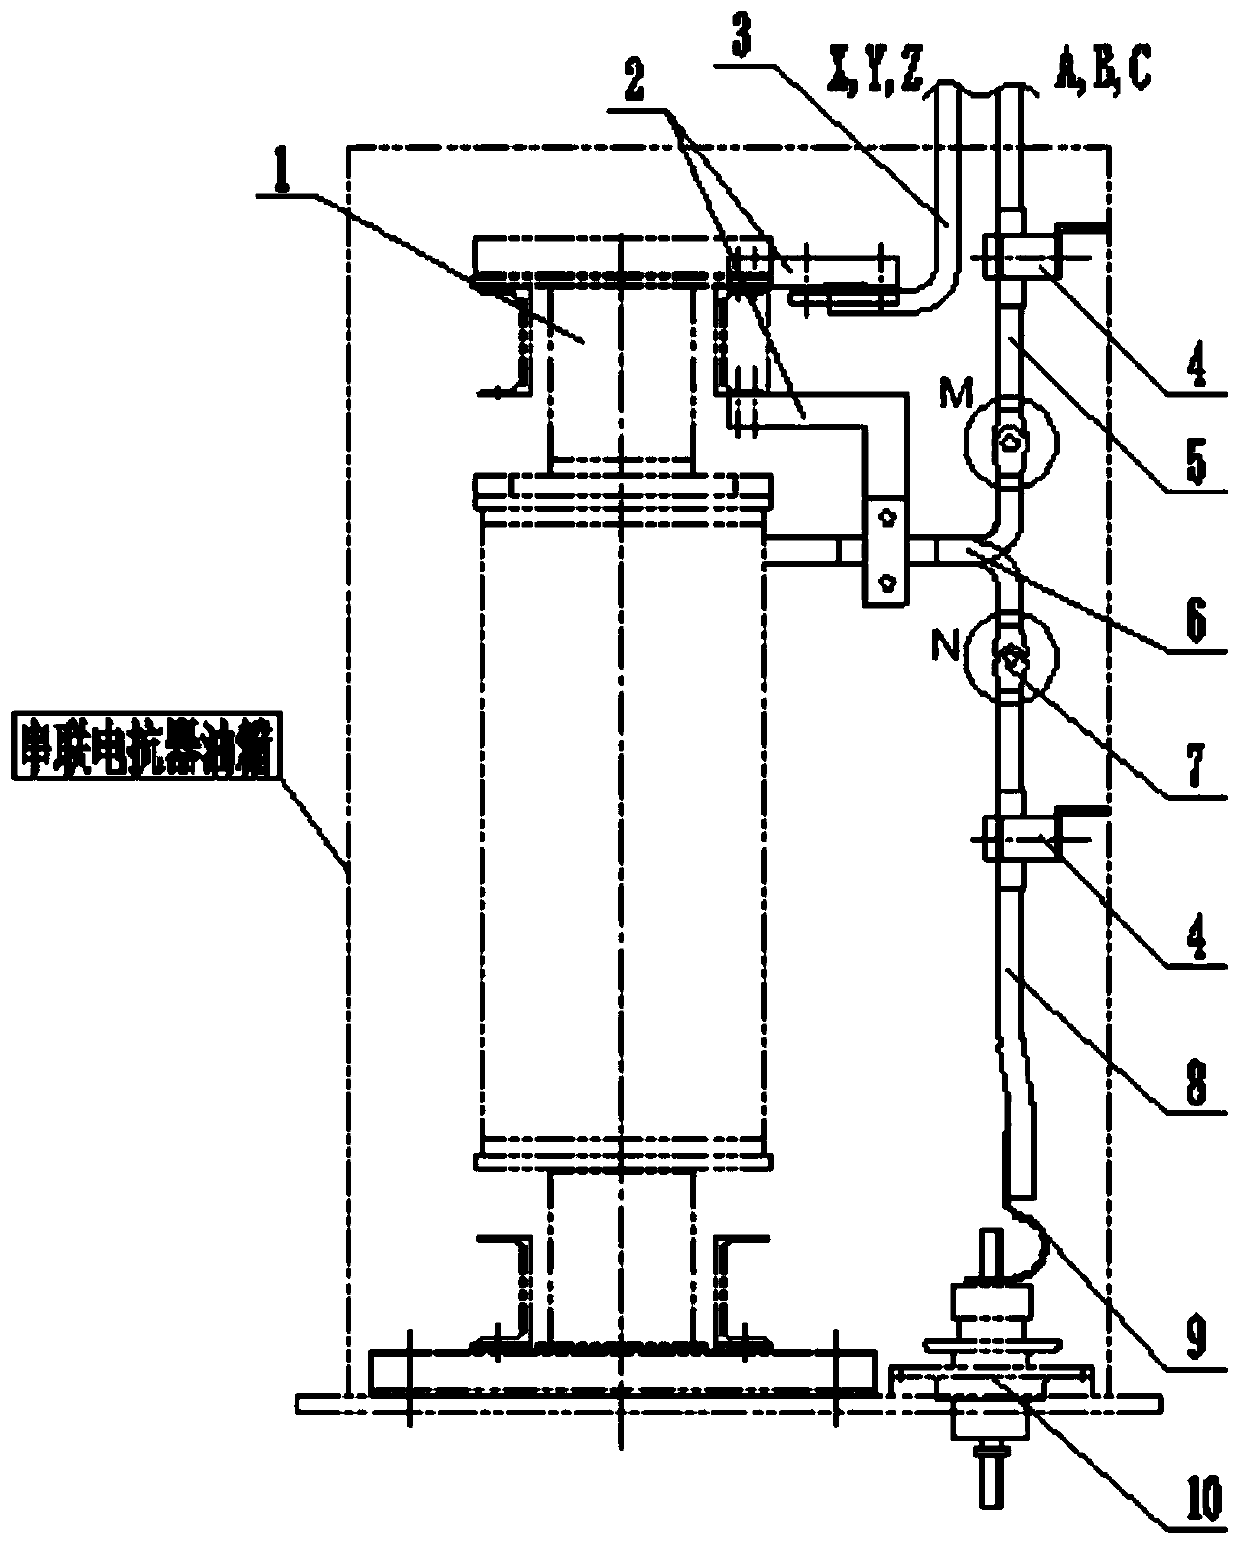 Lead device of oil-immersed series reactor